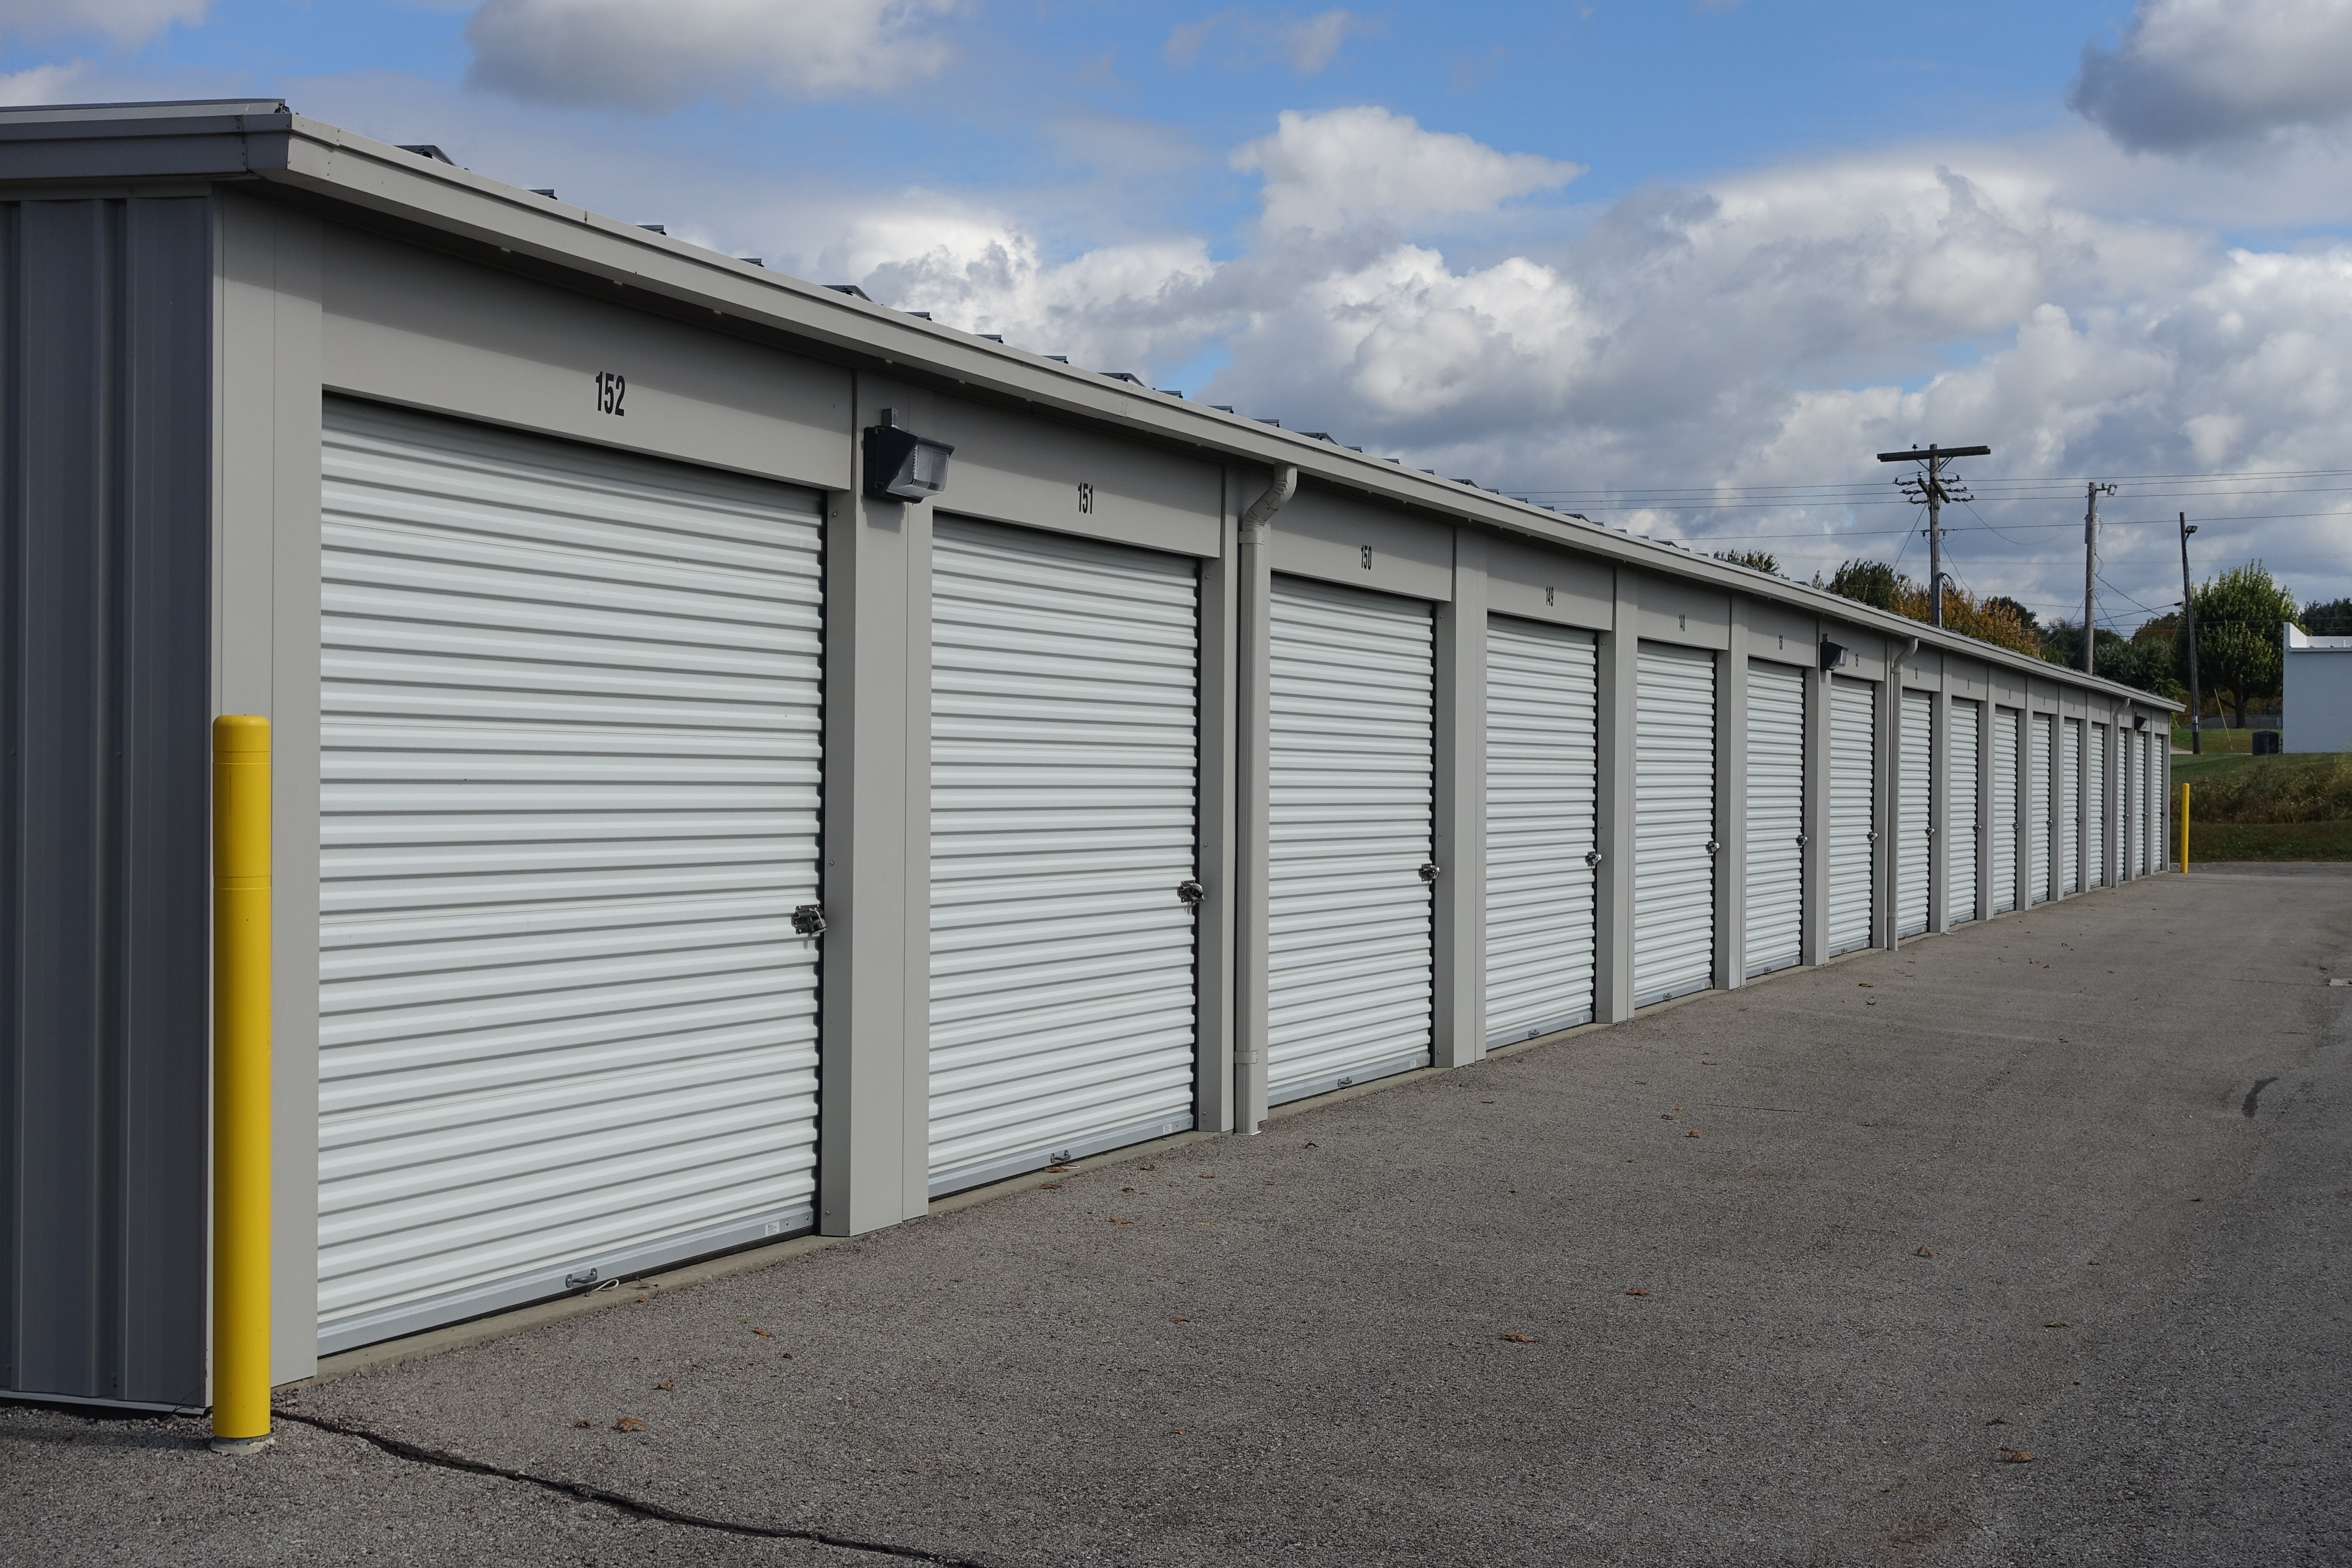 Spacious storage options in a variety of sizes, all with white doors and ample driveway space at Mississippi St Access Storage.